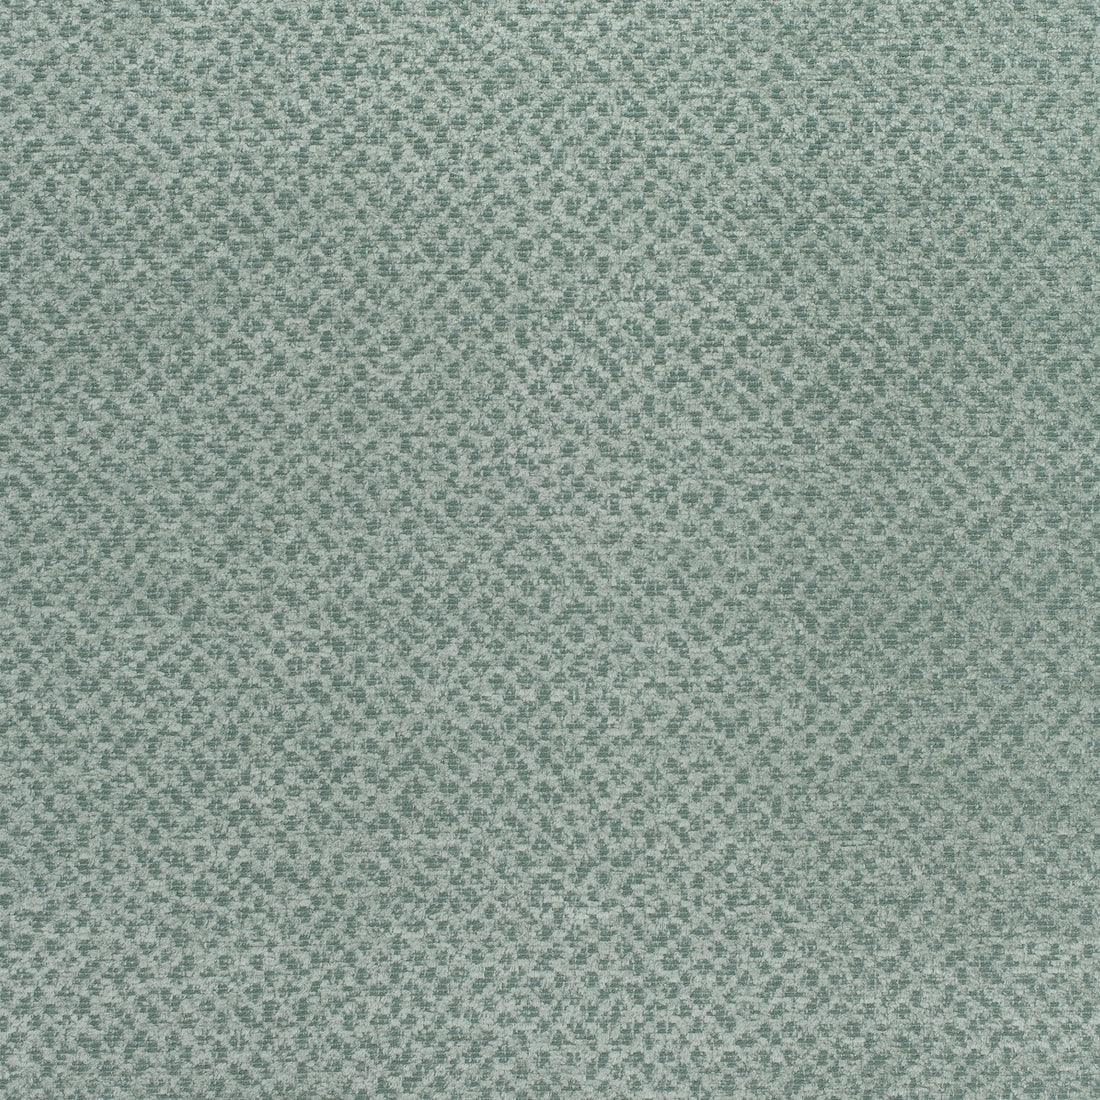 Gryffin fabric in sea glass color - pattern number W80412 - by Thibaut in the Mosaic collection